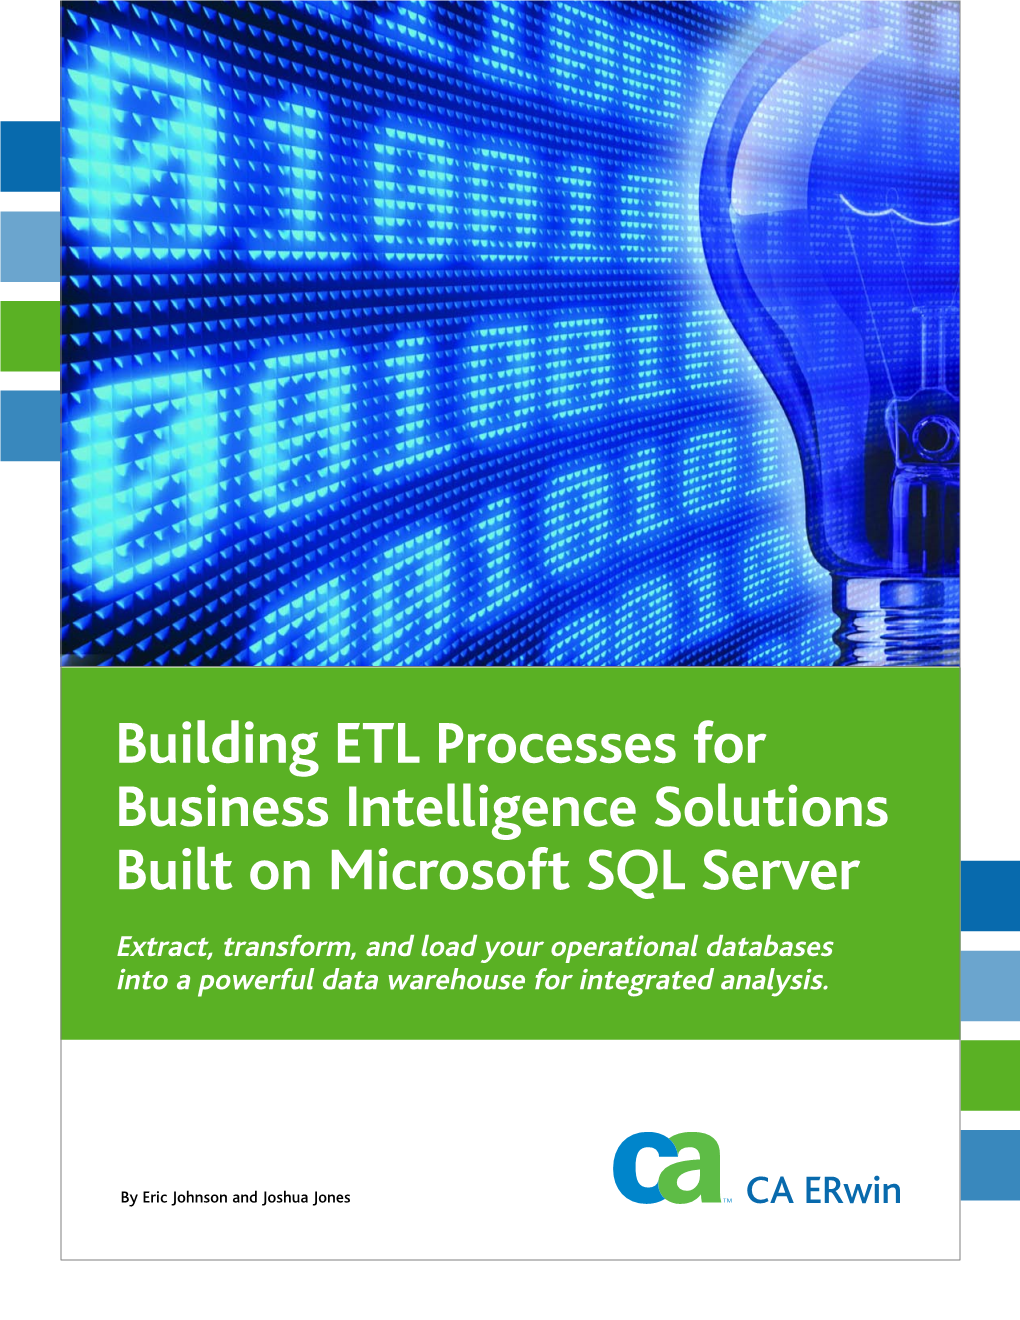 Building ETL Processes for Business Intelligence Solutions Built On